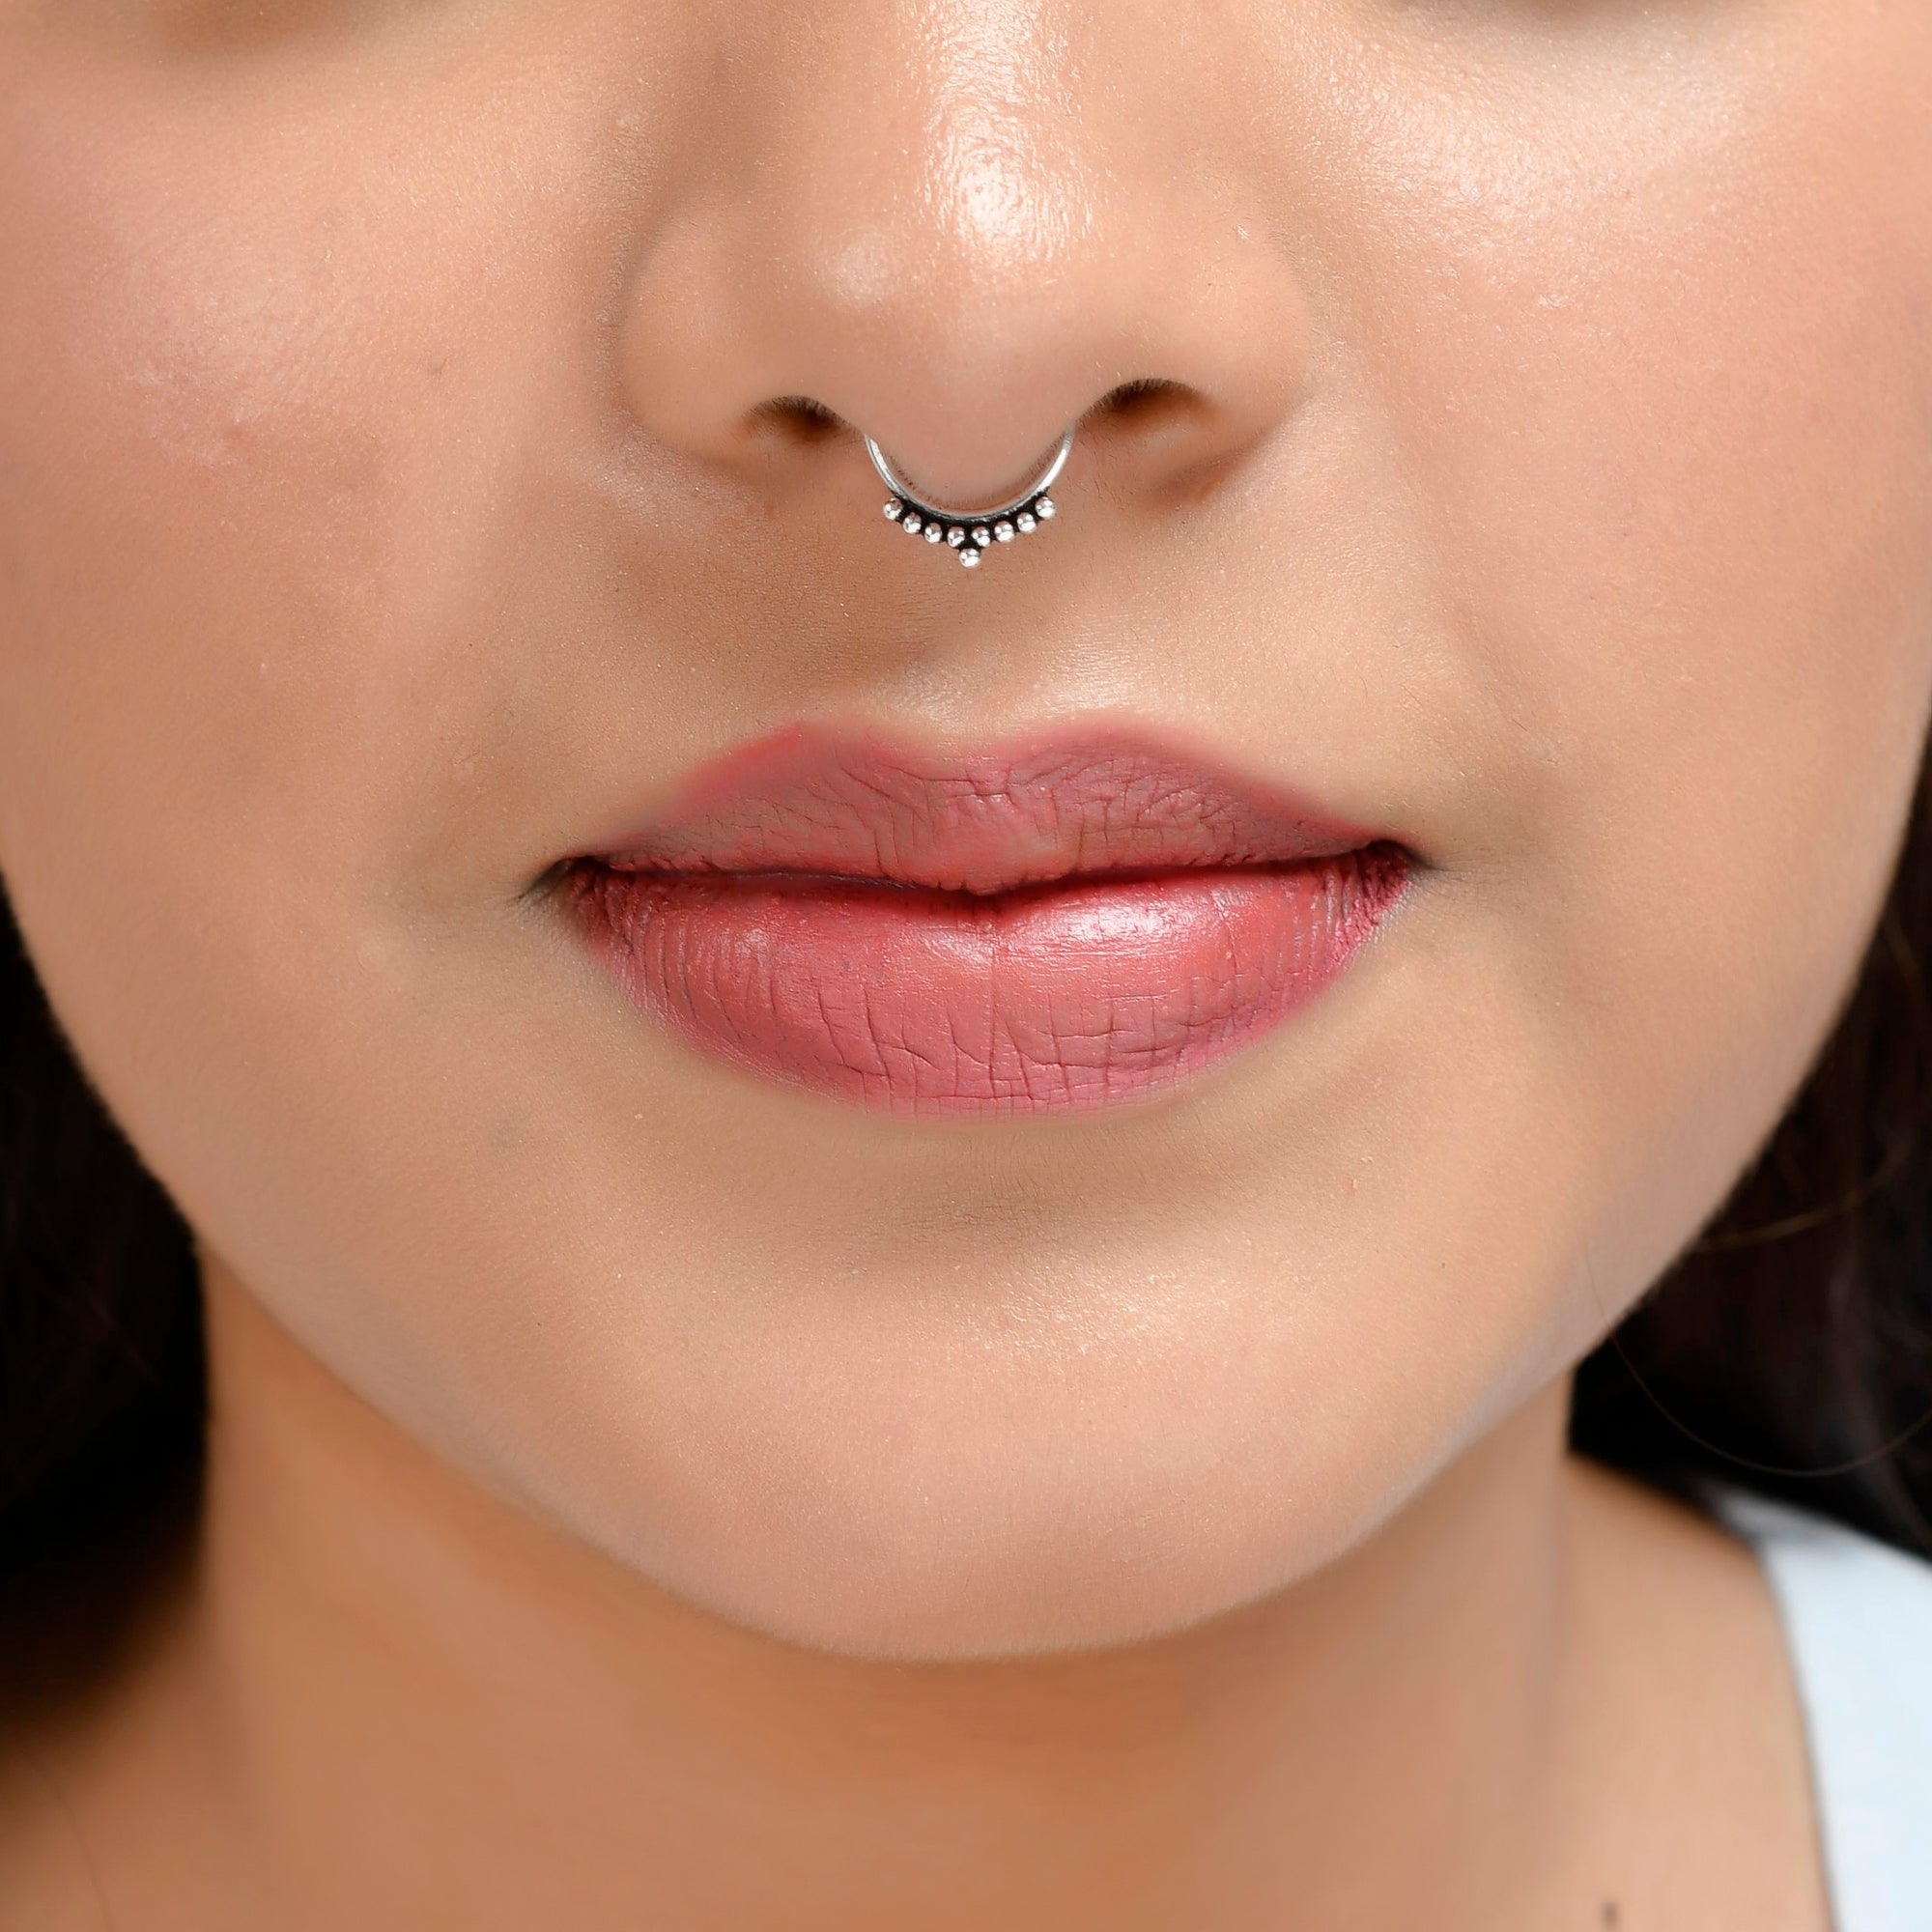 Amazon.com: Handmade Designer Silver Hoop Septum, Nose Ring Piercing, Thin  and Fine Body Jewelry, 925 Sterling Silver, 18 Gauge : Handmade Products